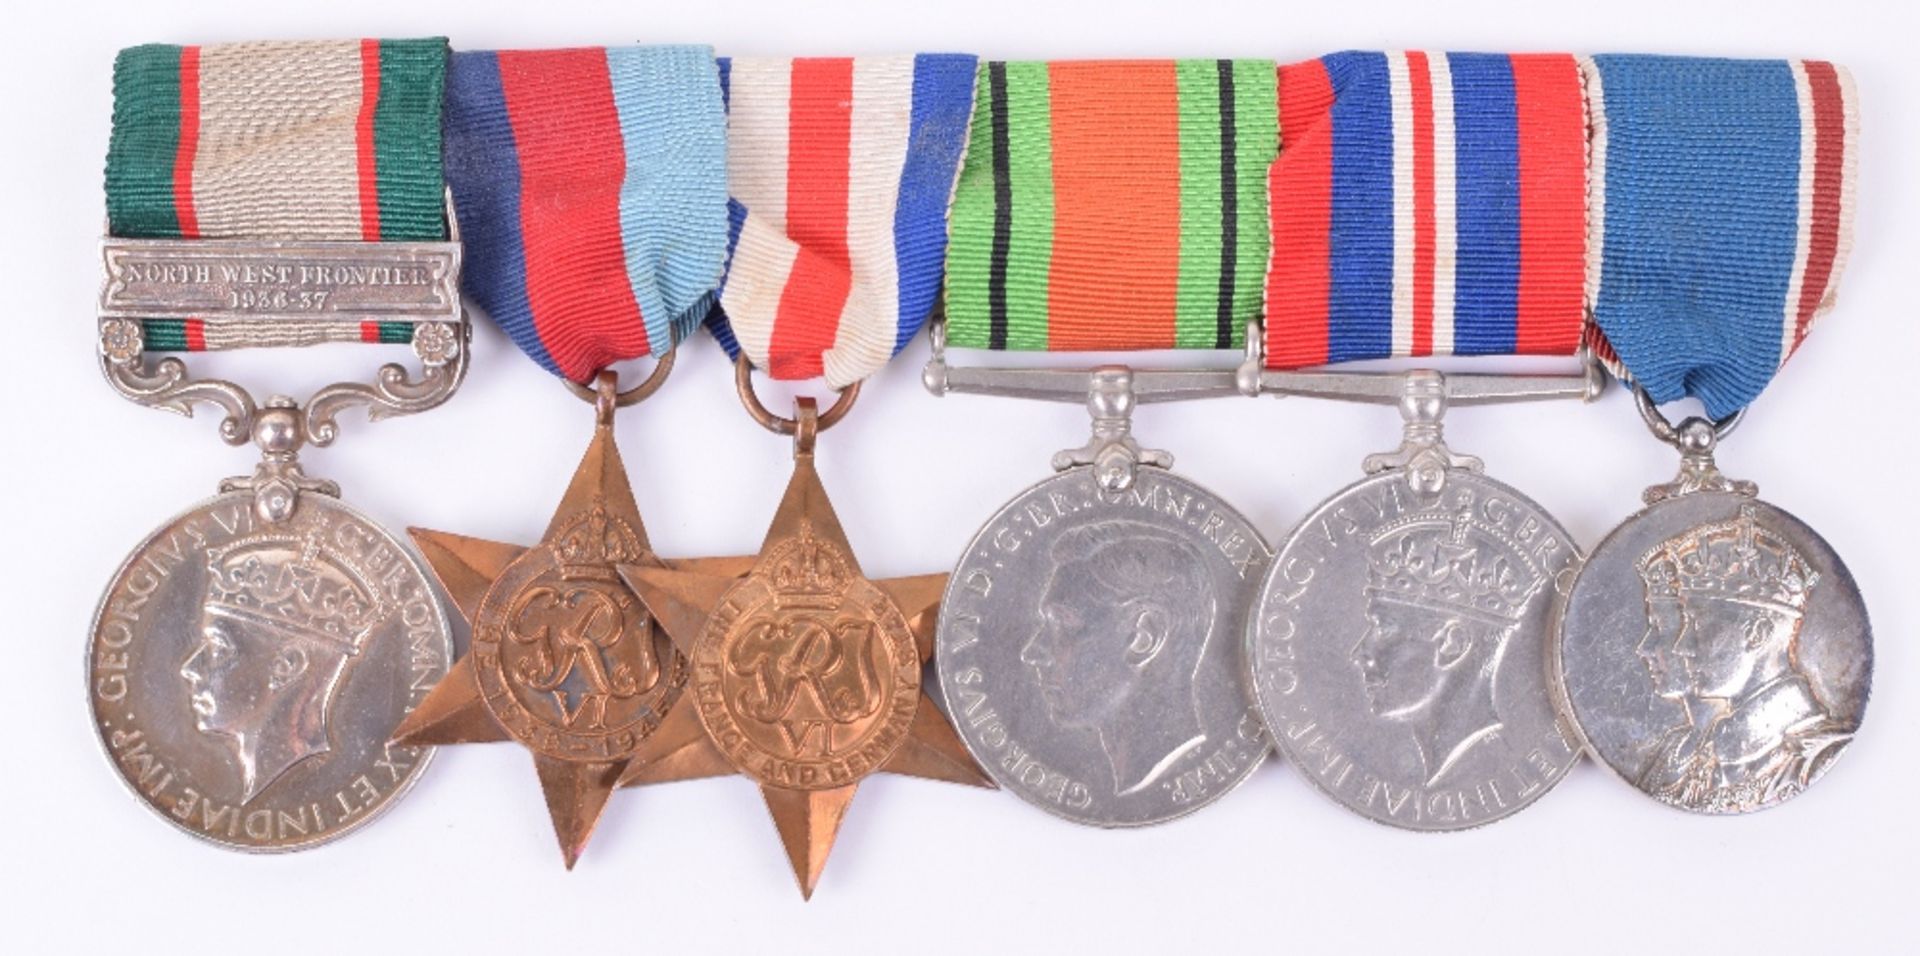 North West Frontier and WW2 Campaign Medal Group of Six to the Green Howards